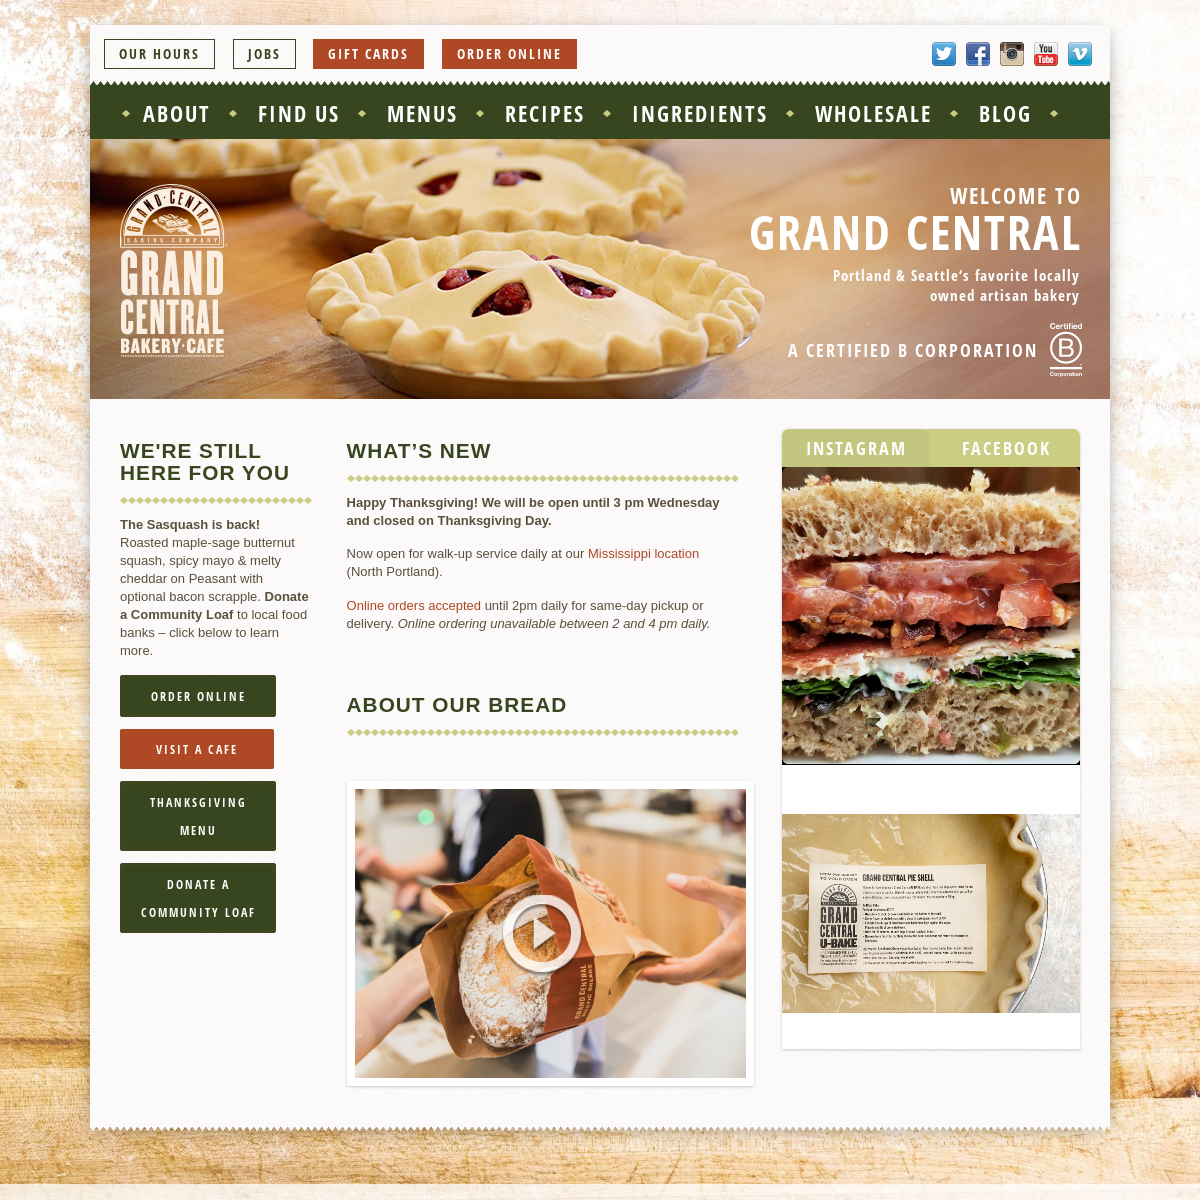 A complete backup of grandcentralbakery.com